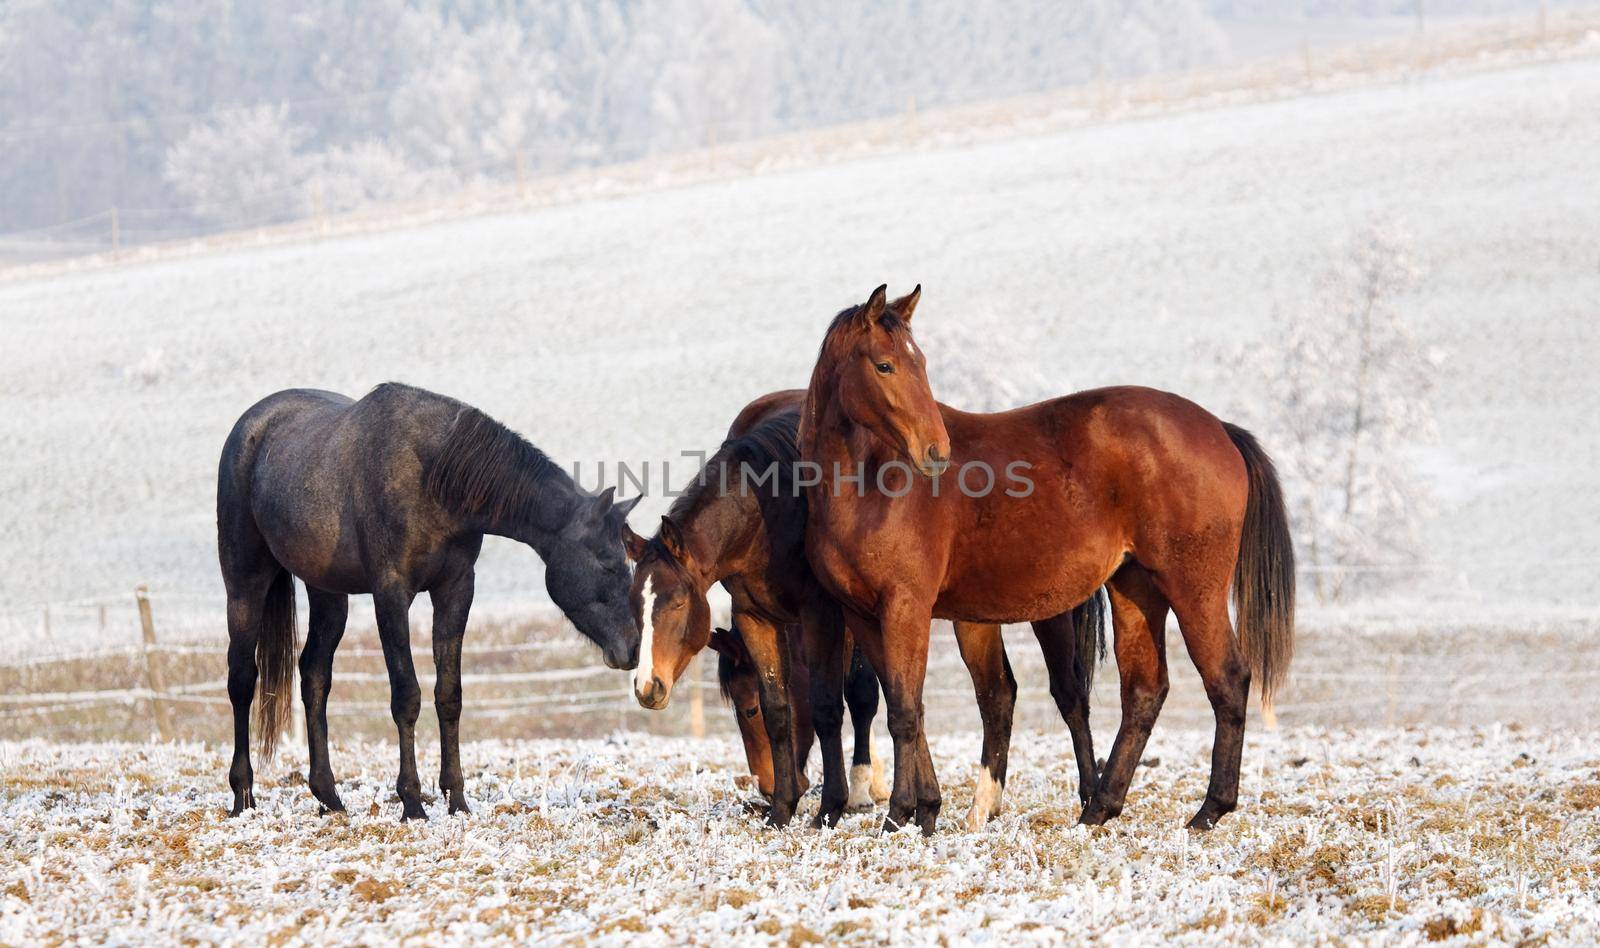 Four horses in a winter landscape